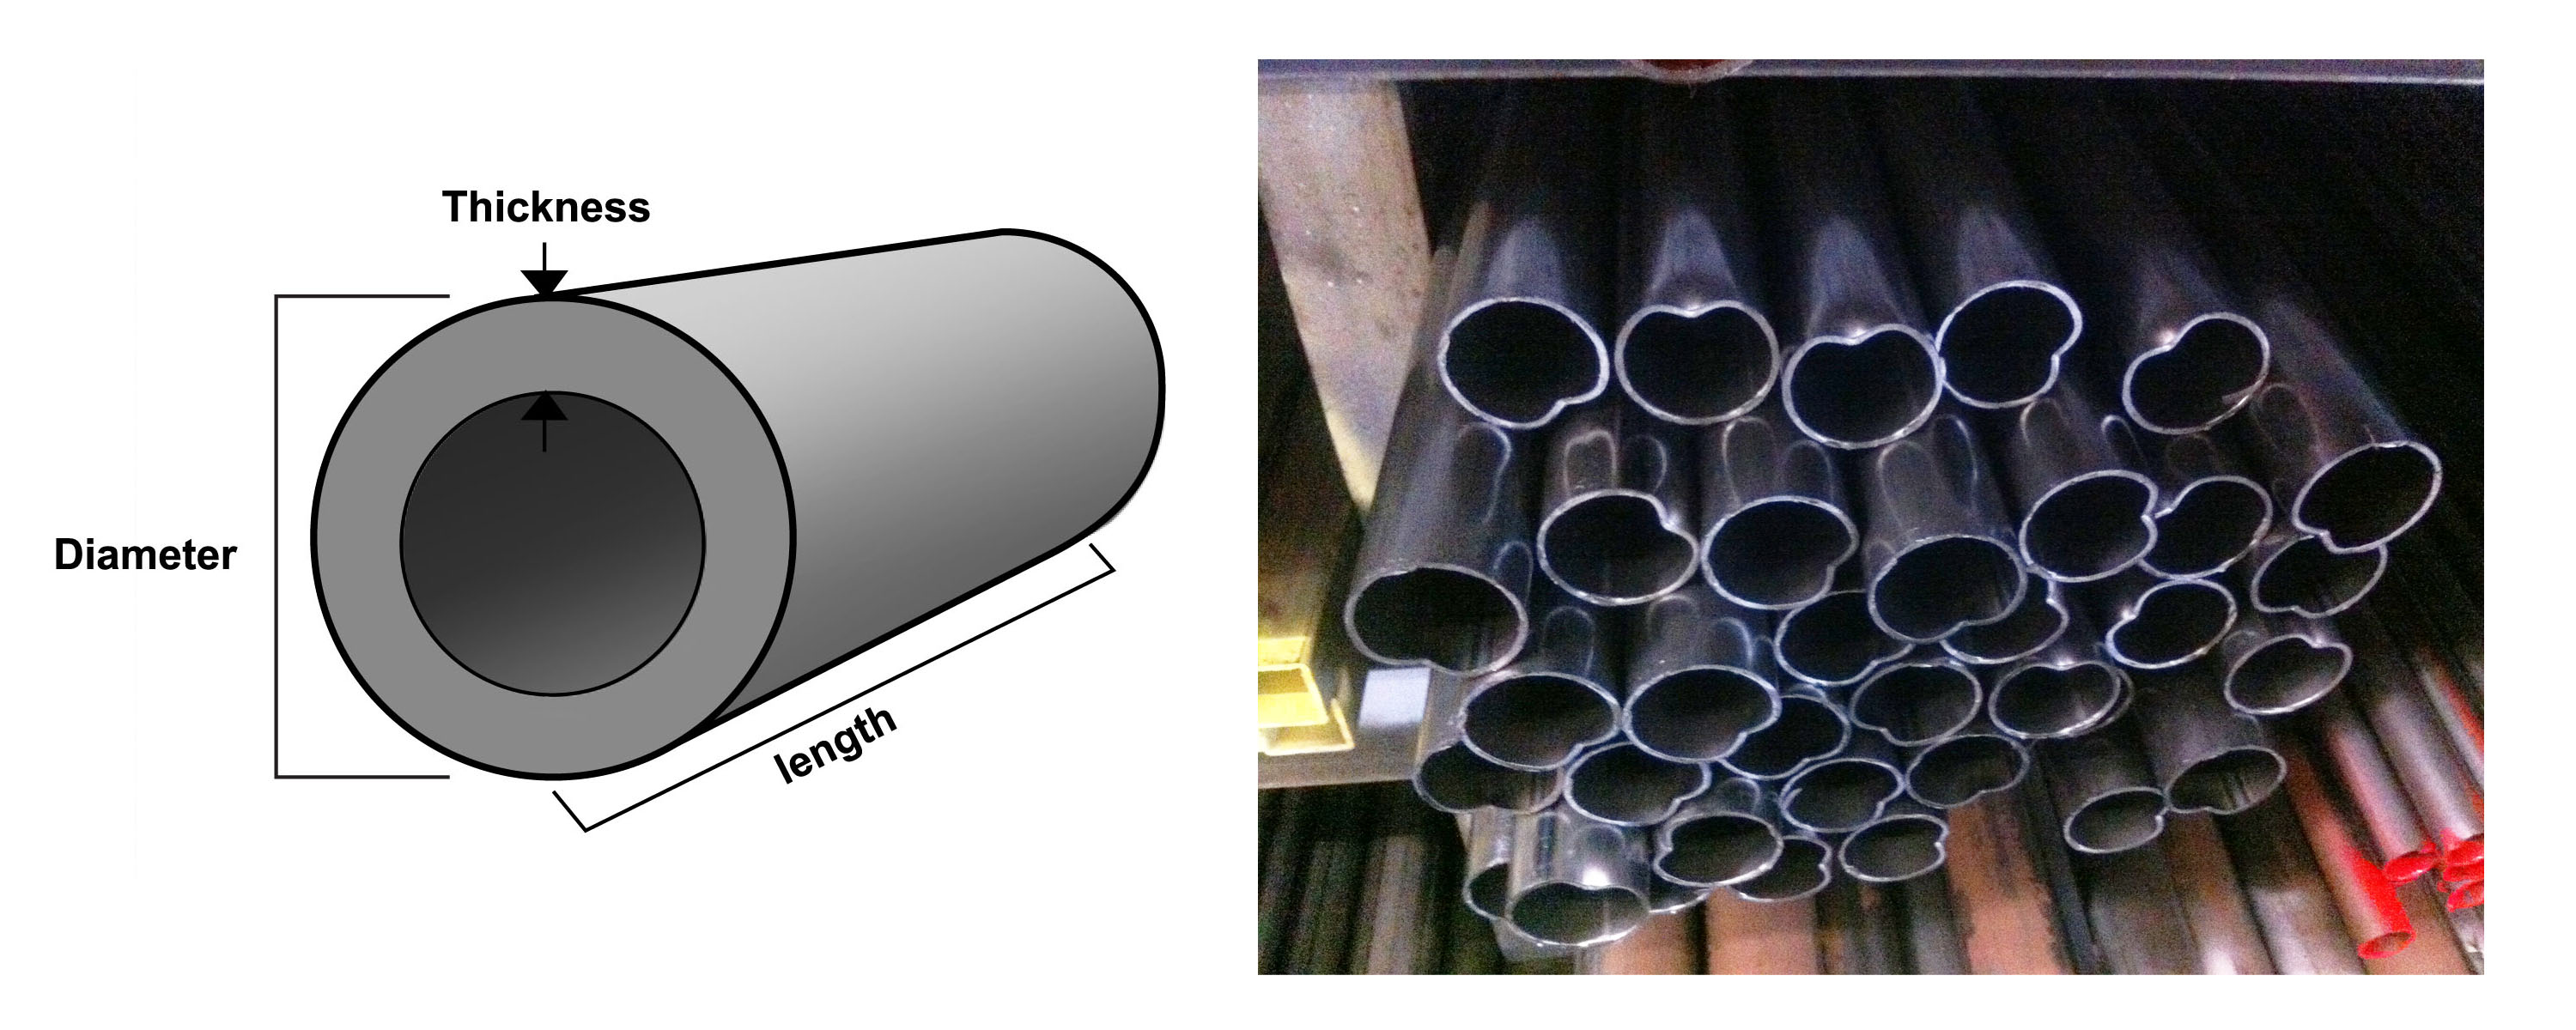 Details about   Construction tube dia 6x1 to 17.5x2.5 round pipe tube steel threaded tube show original title